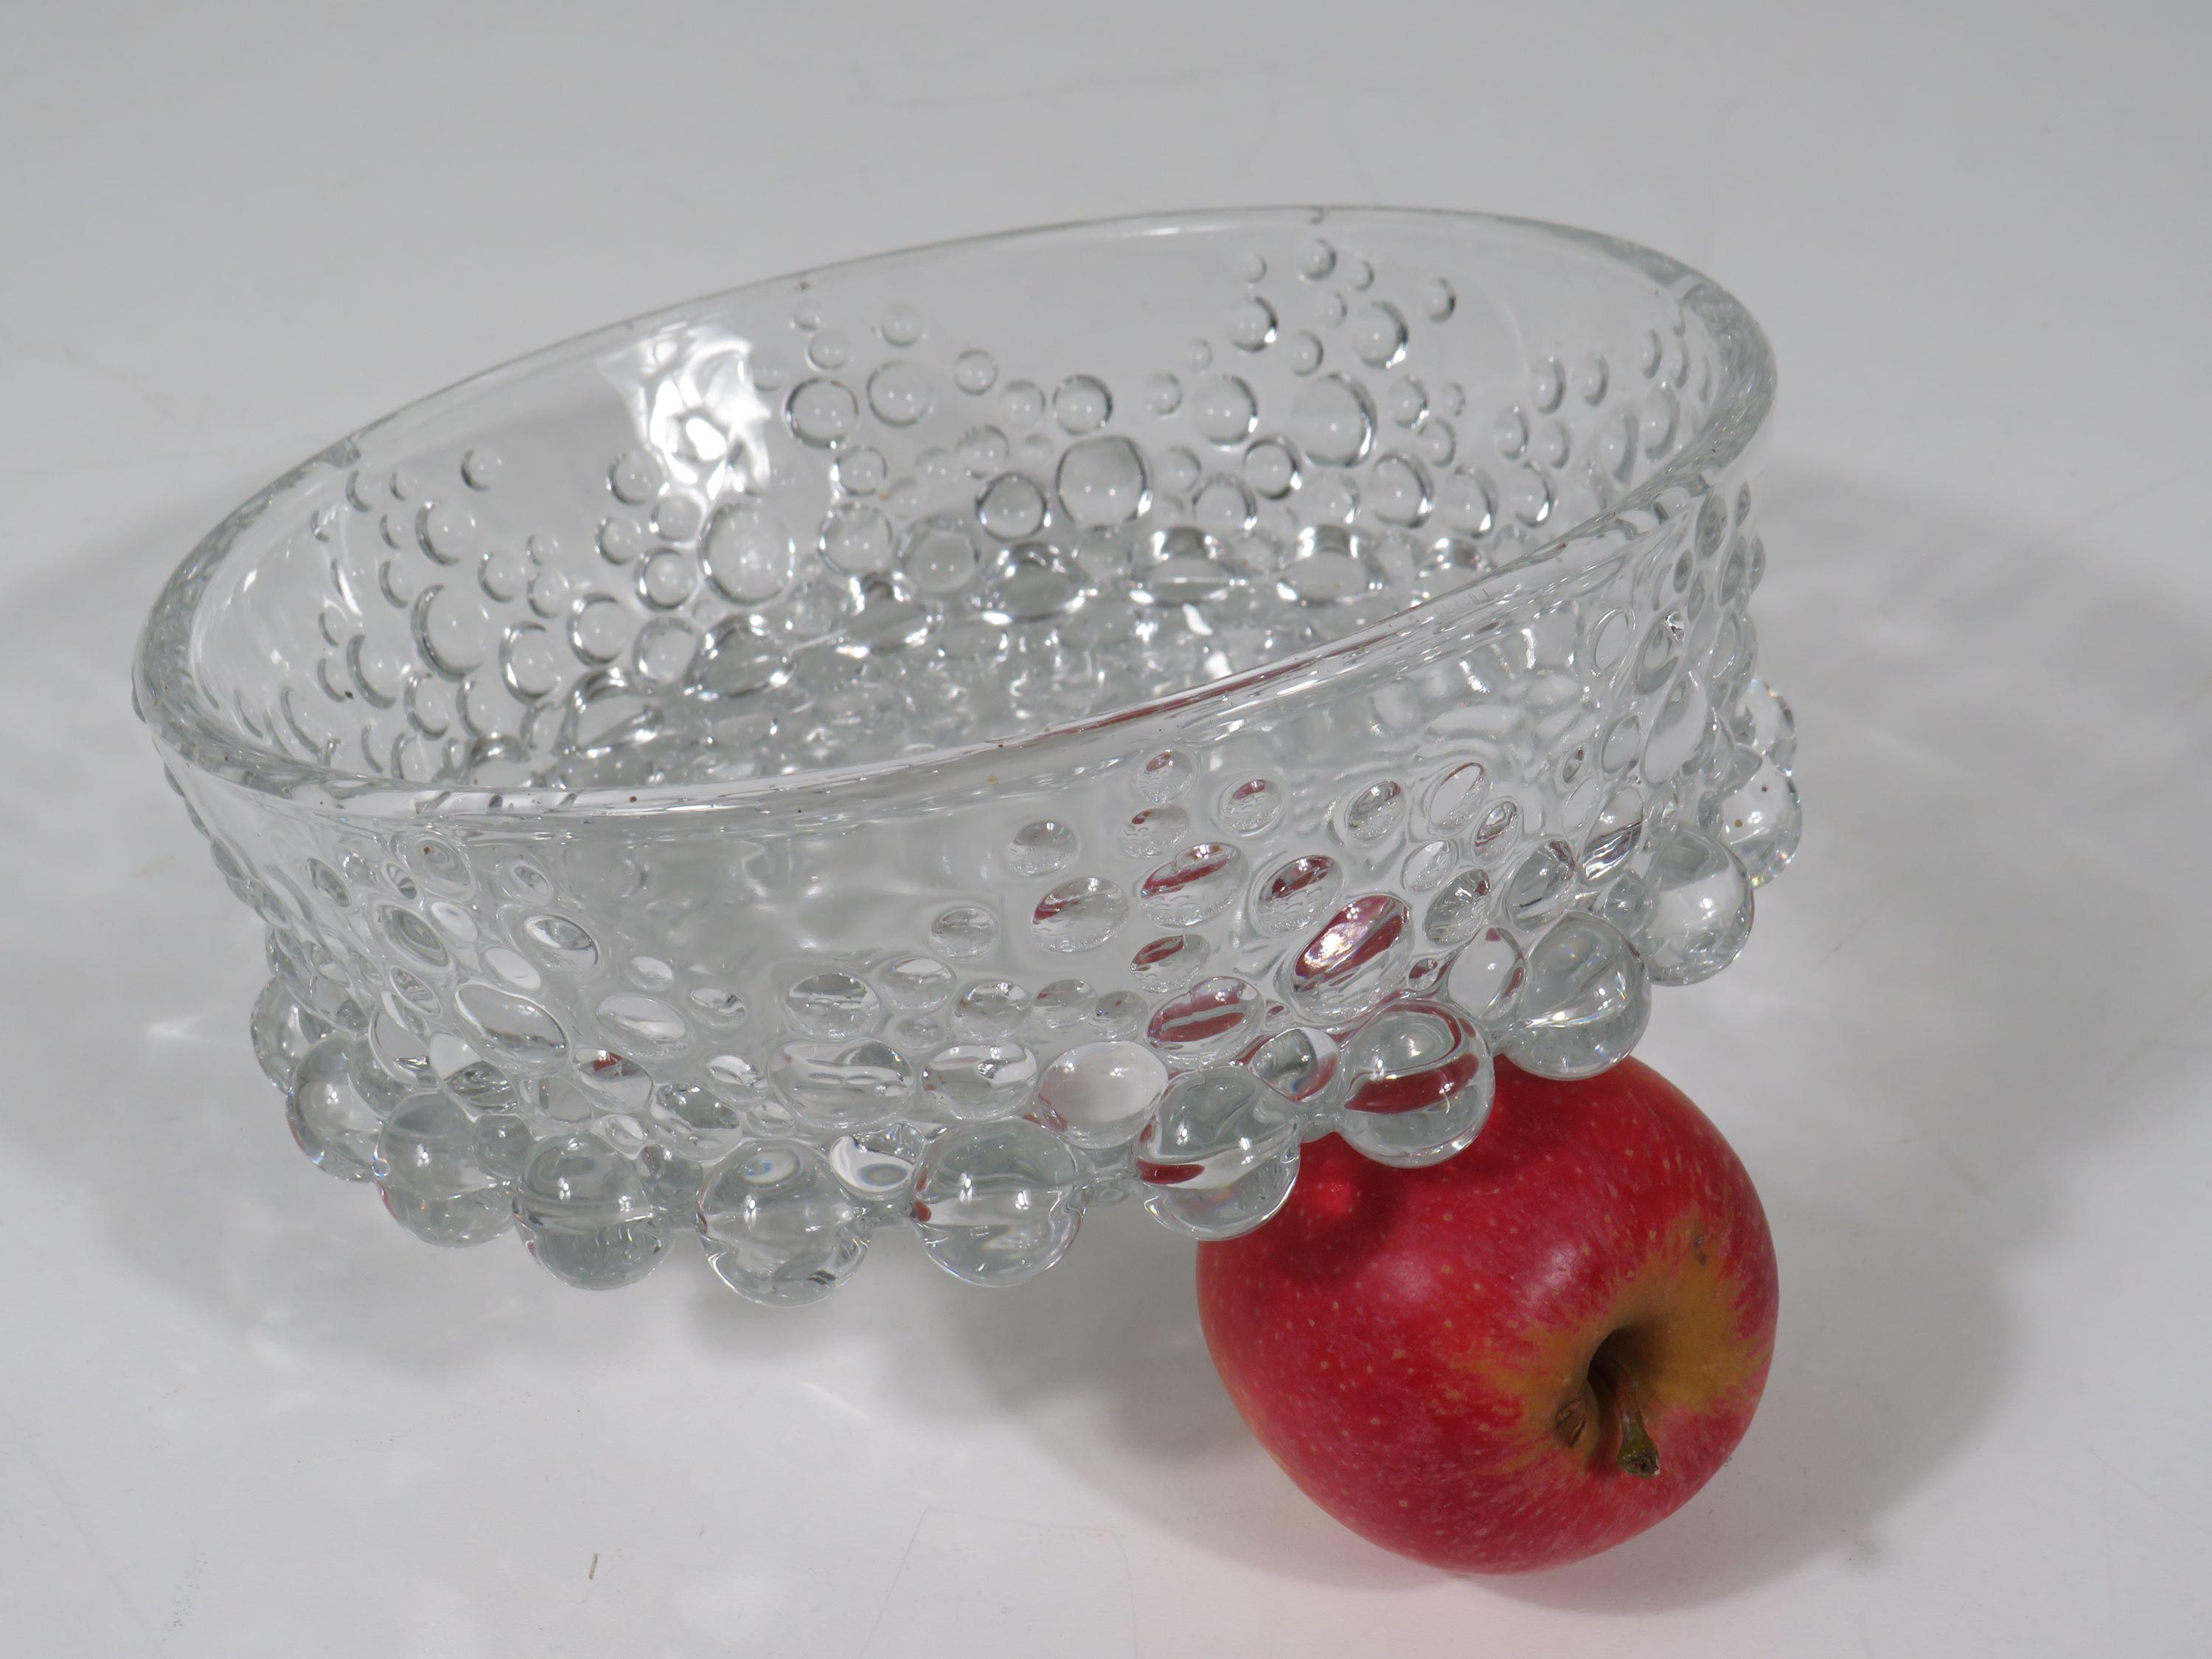 Beautifully designed bowl made of thick bubble glass.